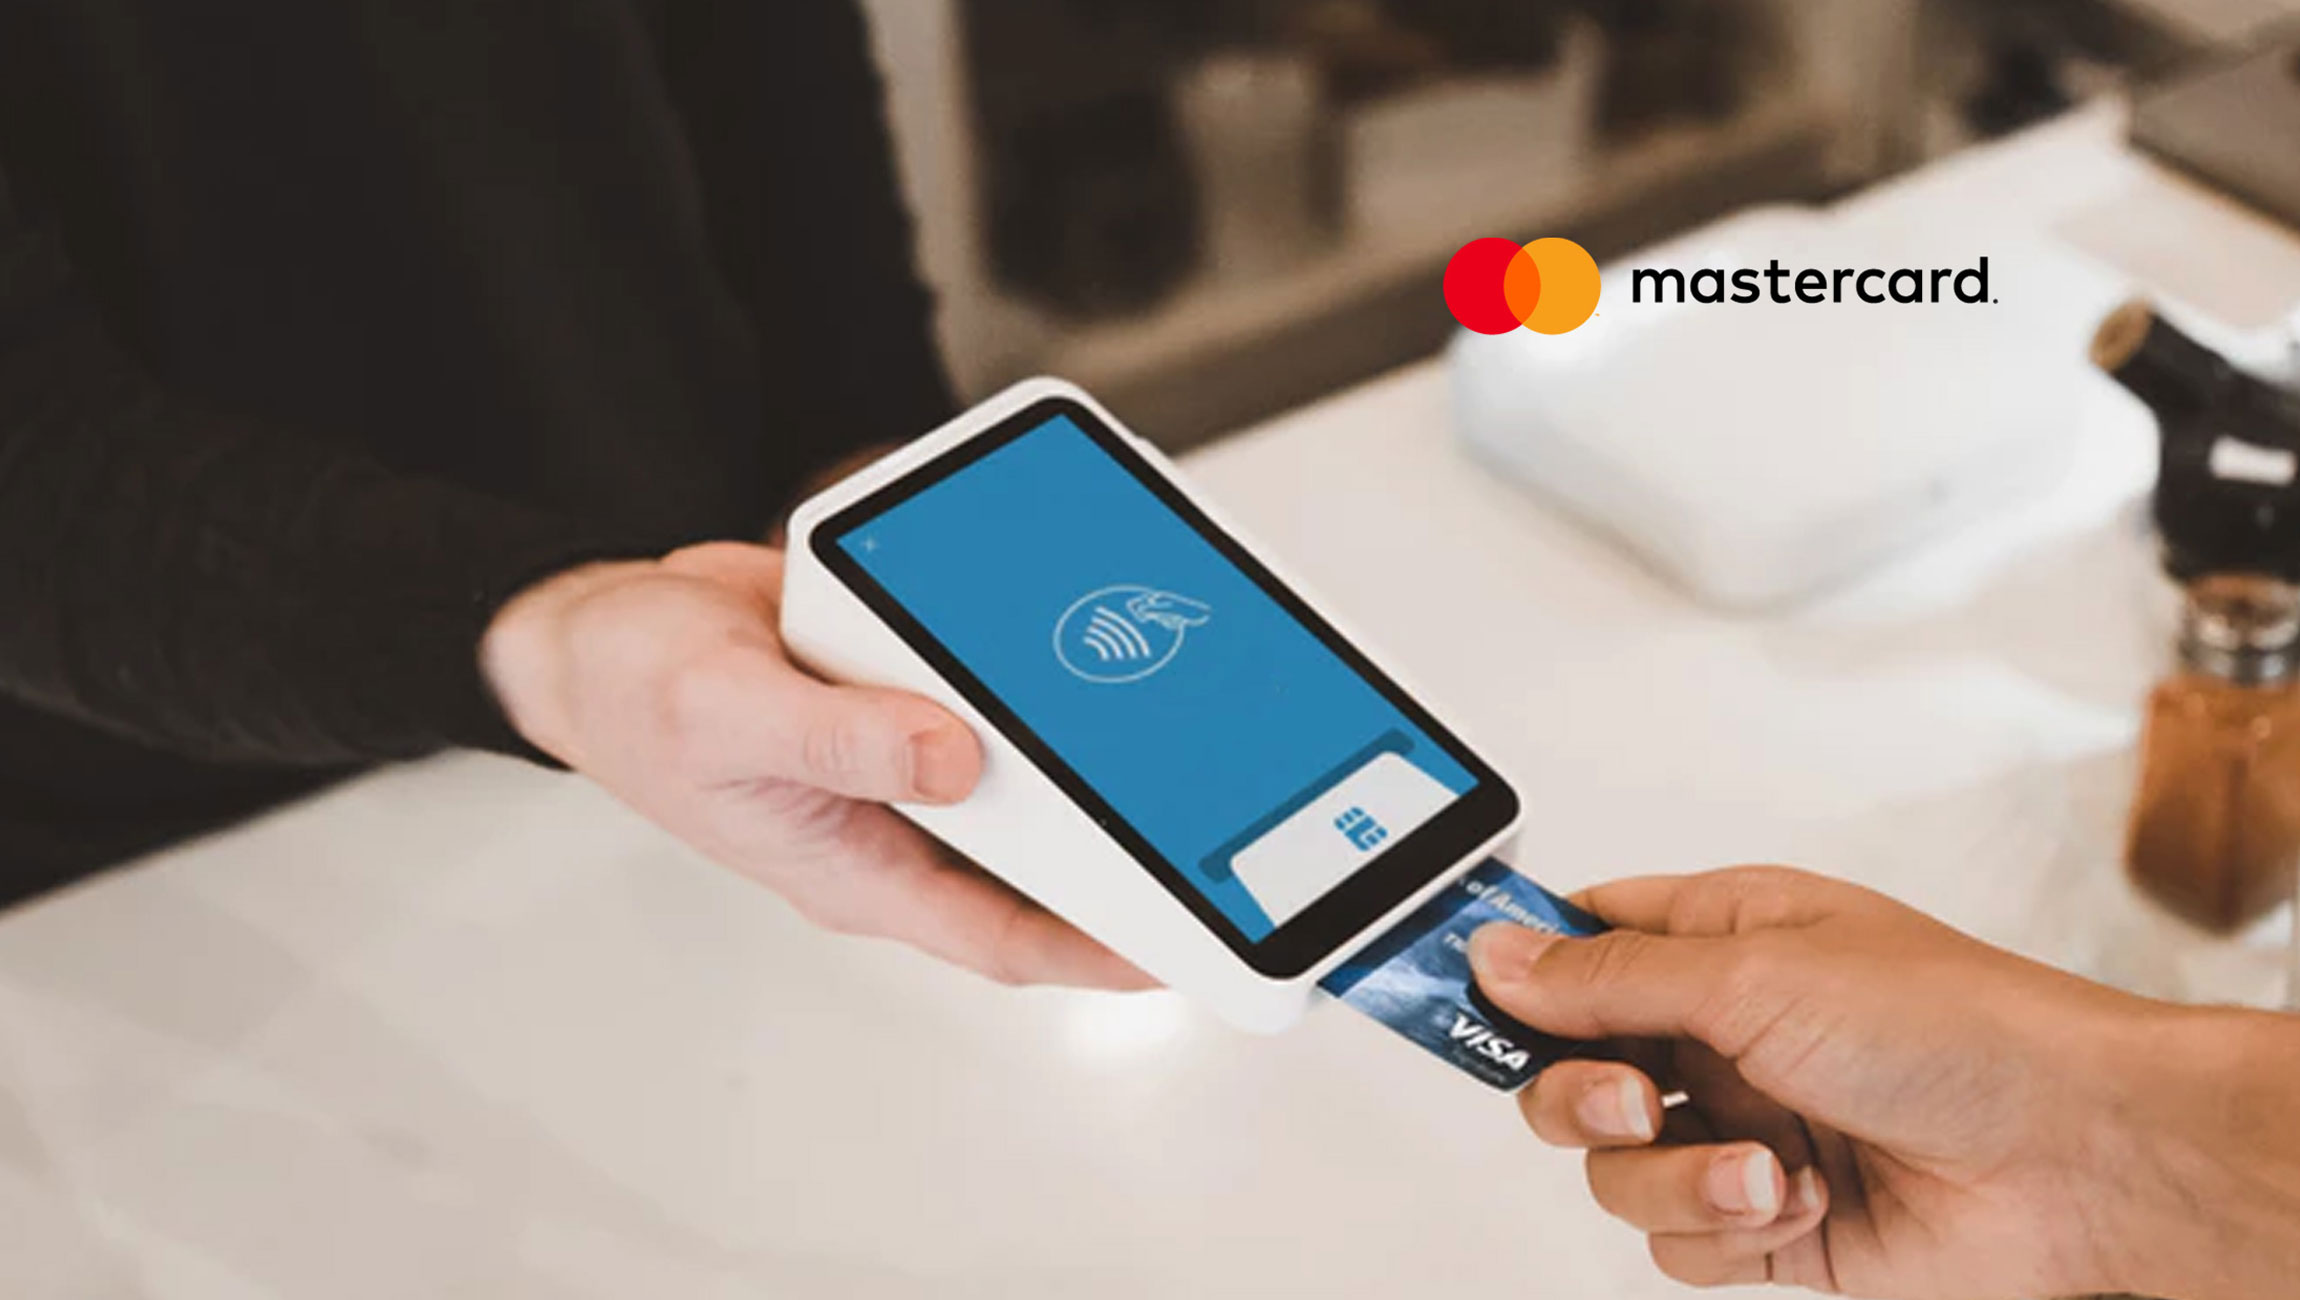 Mastercard Helps Small Businesses Digitally Enhance Their Operations With New Microsoft, QuickBooks and Zoho Benefits